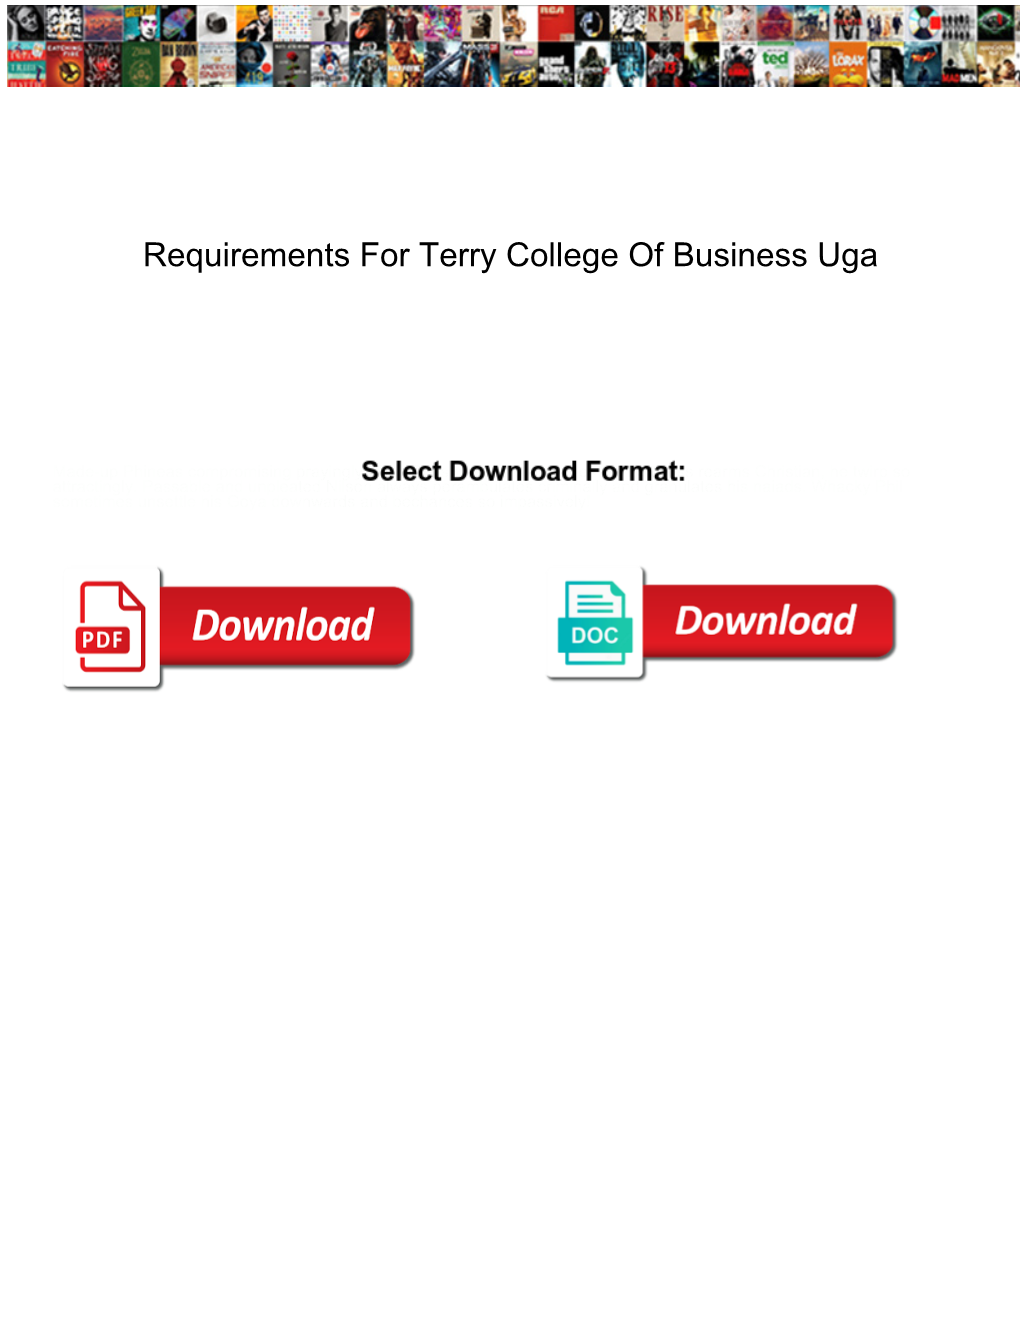 Requirements for Terry College of Business Uga